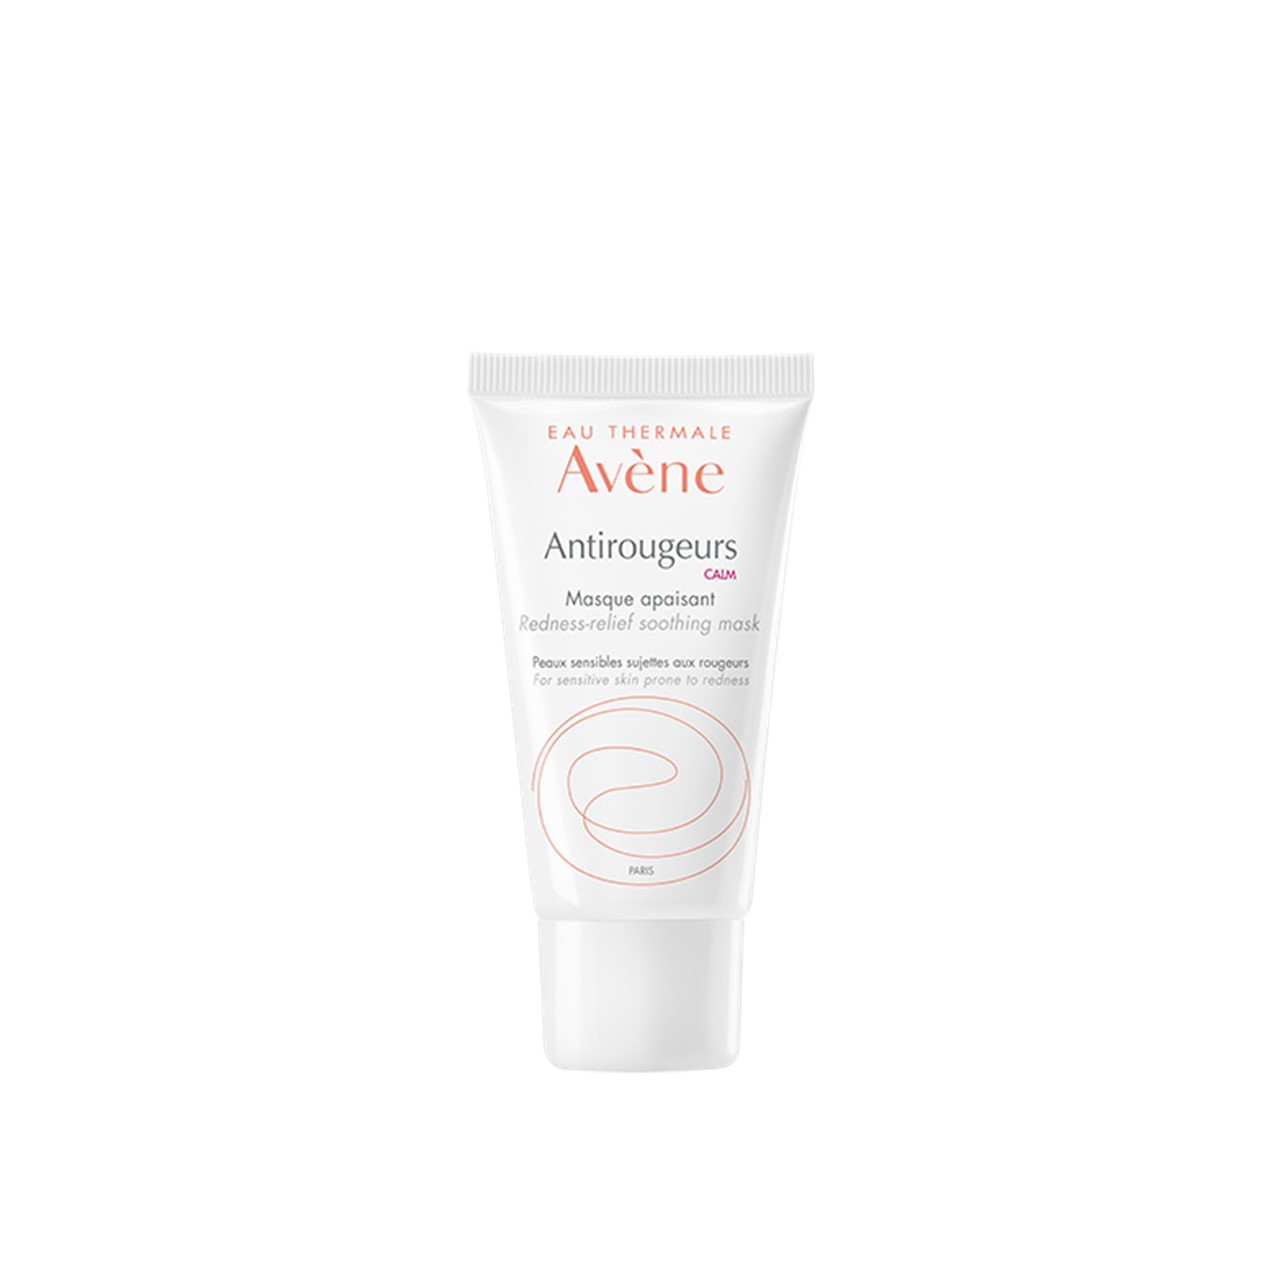 Avène Antirougeurs Calm Redness-Relief Soothing Mask 50ml (1.69fl oz)